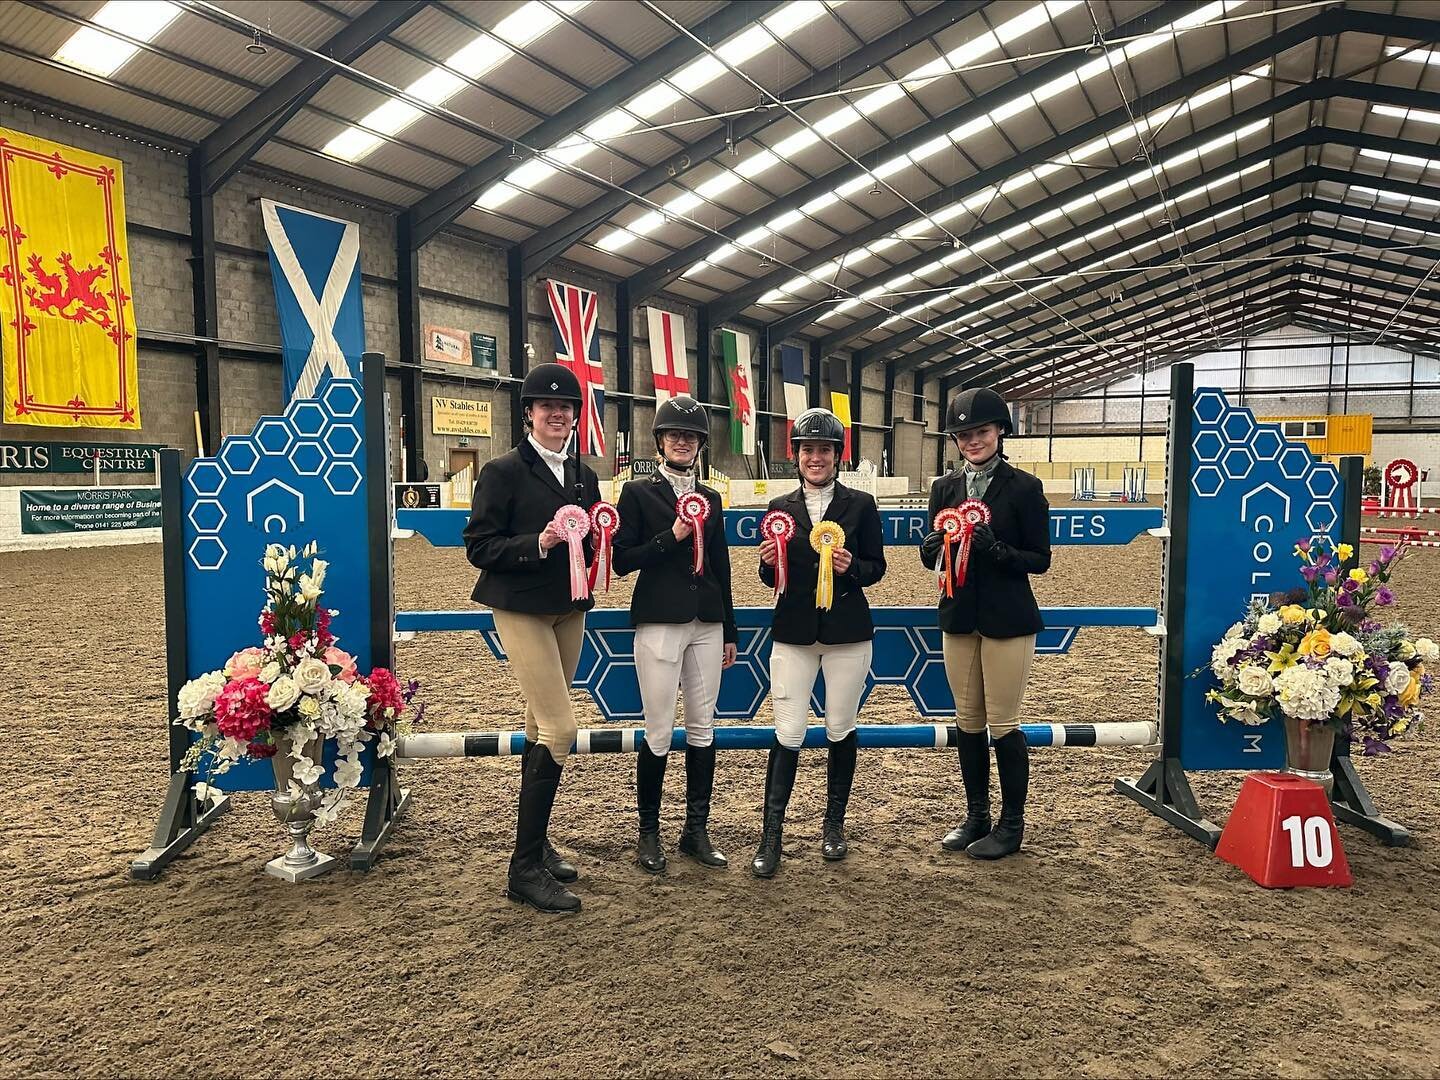 Fantastic day at Morris stables for D team comp today ! Came home with an overall team 1st 🏆 Leyre in 3rd, Alanna in 5th, Jamie in 6th and Savannah in 7th for individuals. Well done everyone who competed today and thank you @gcu.equestrian for hosti